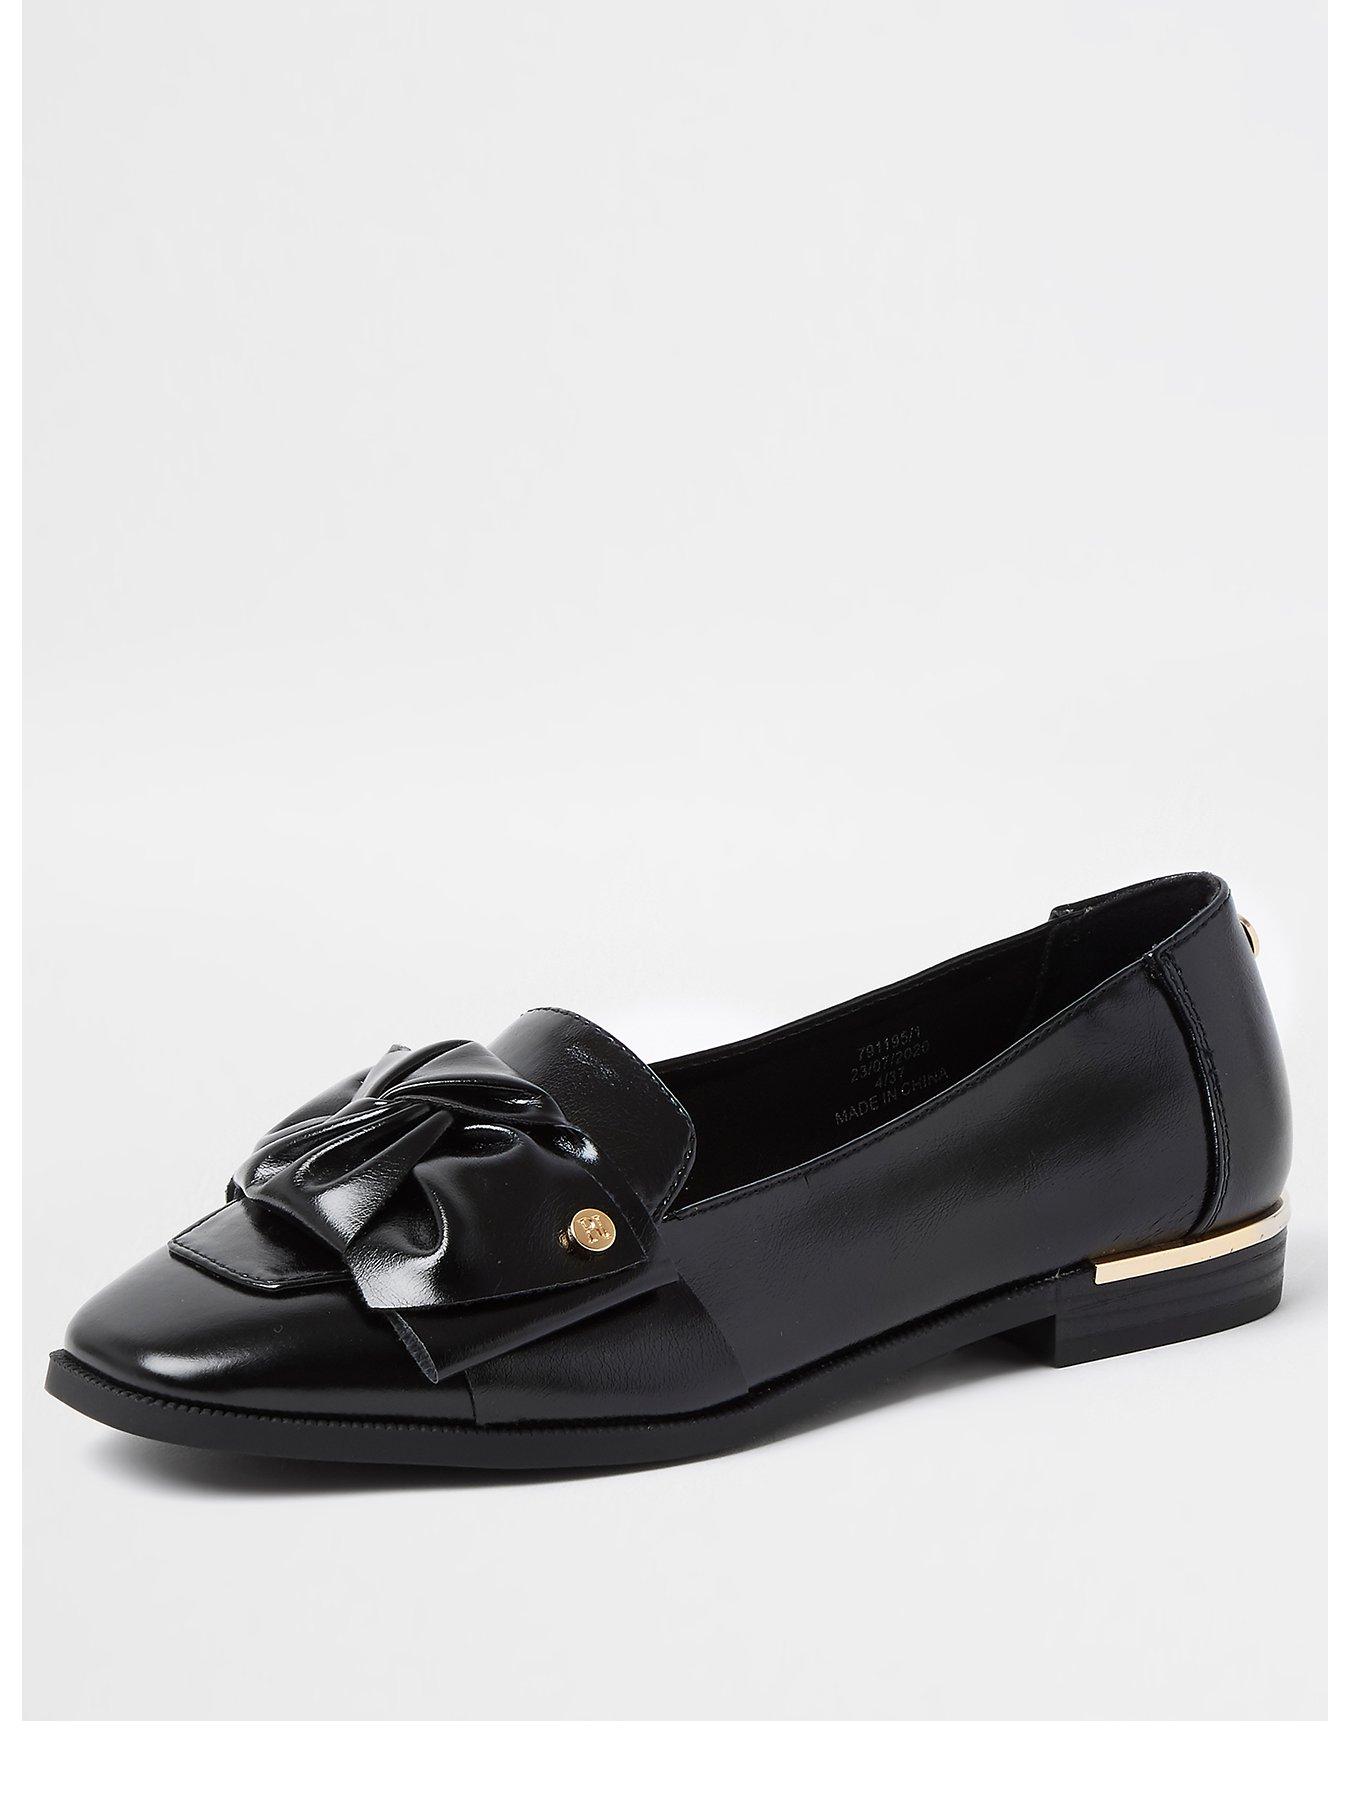 littlewoods river island shoes